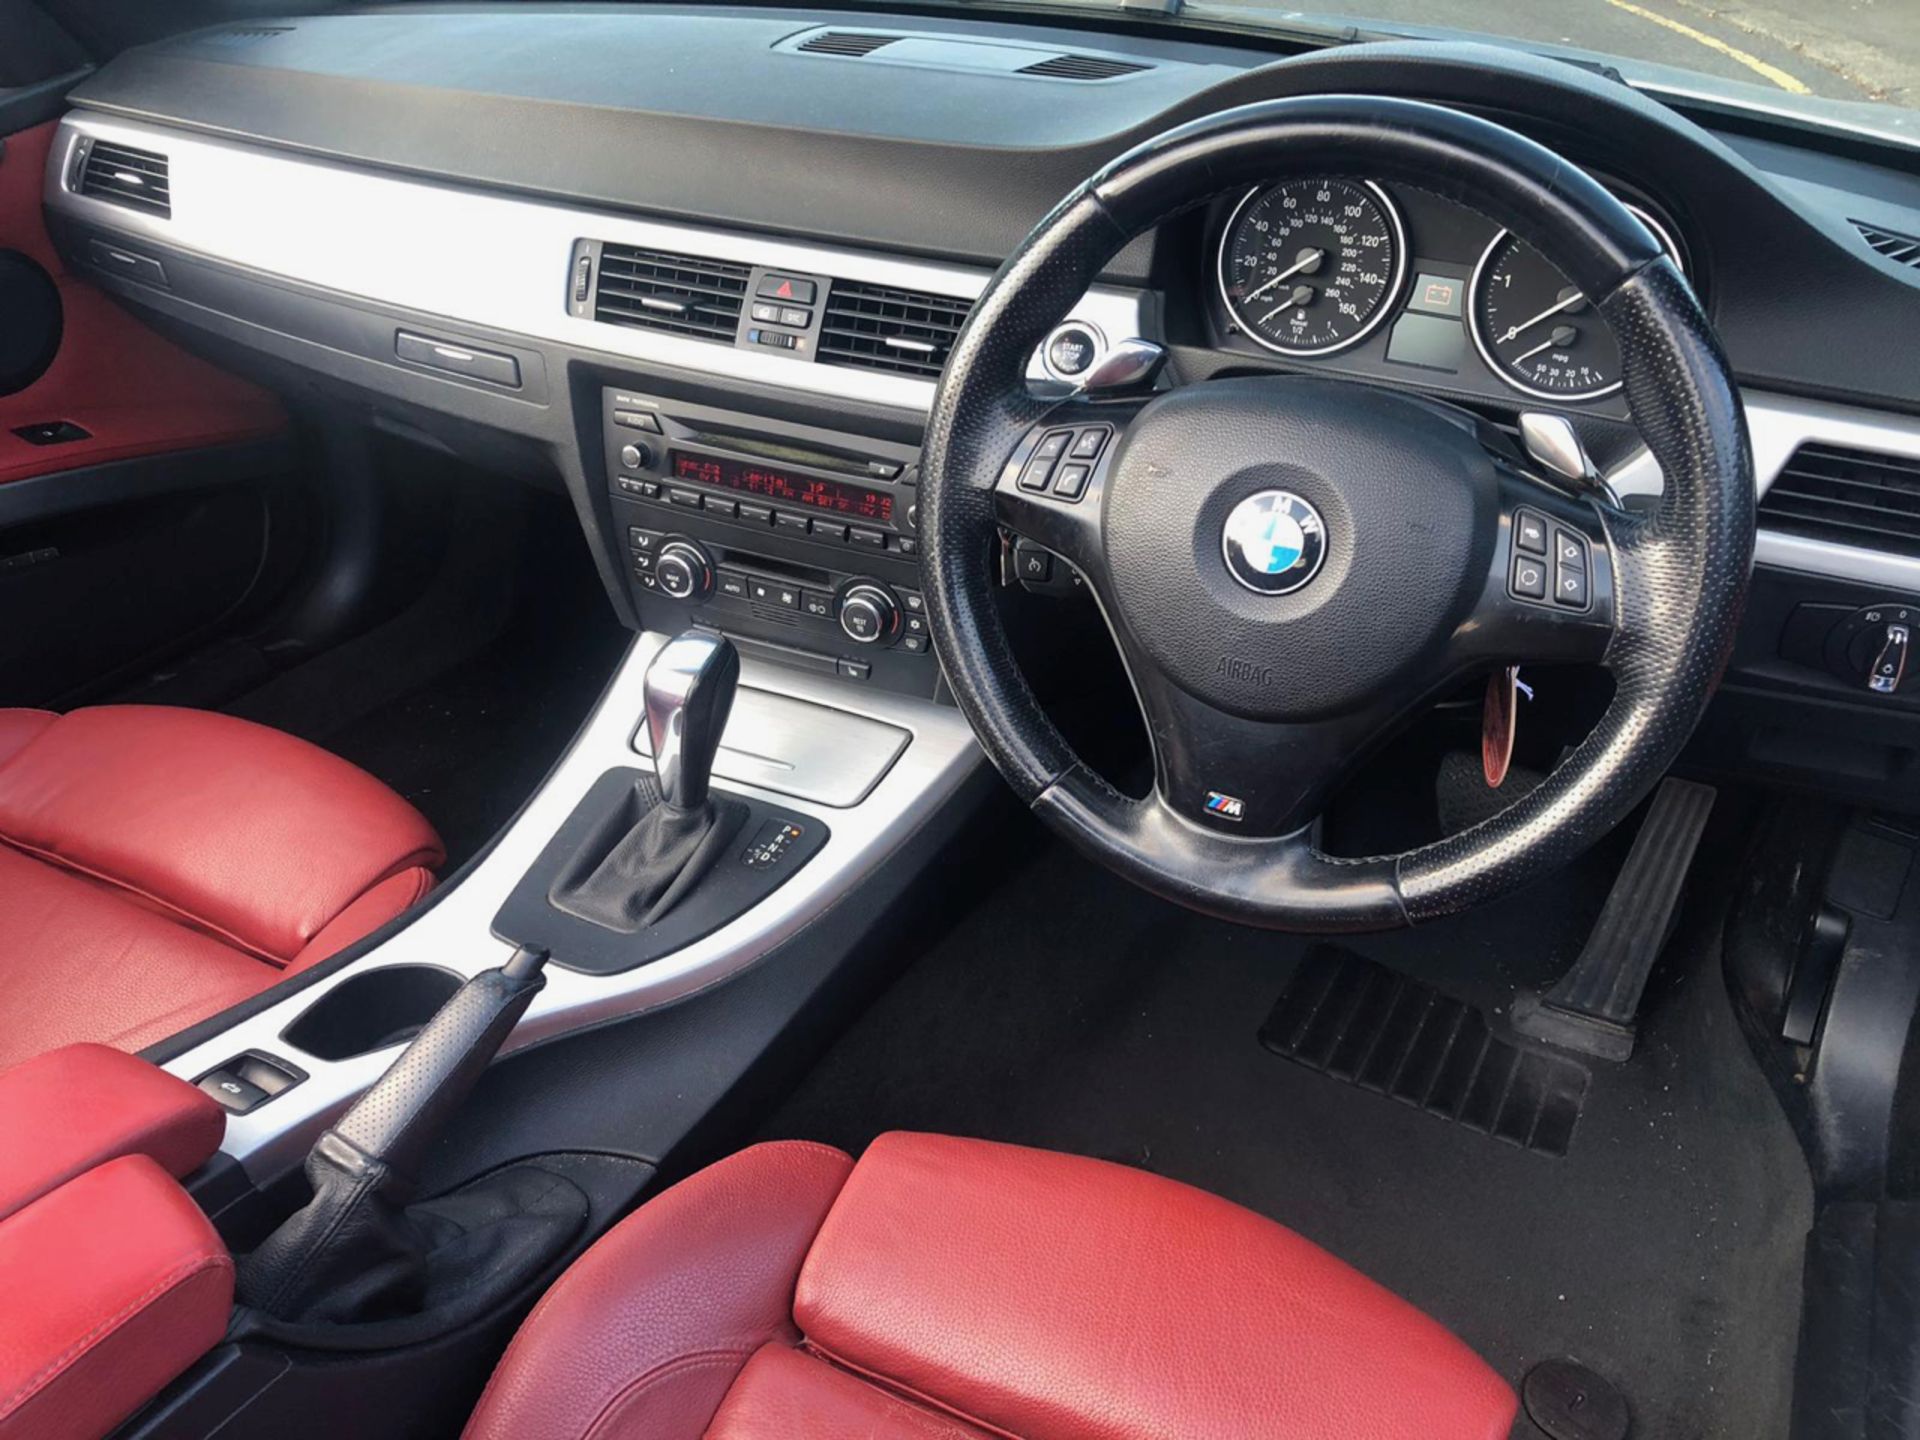 BMW 325D M Sport Auto Convertible With Paddle Shift - Image 11 of 12